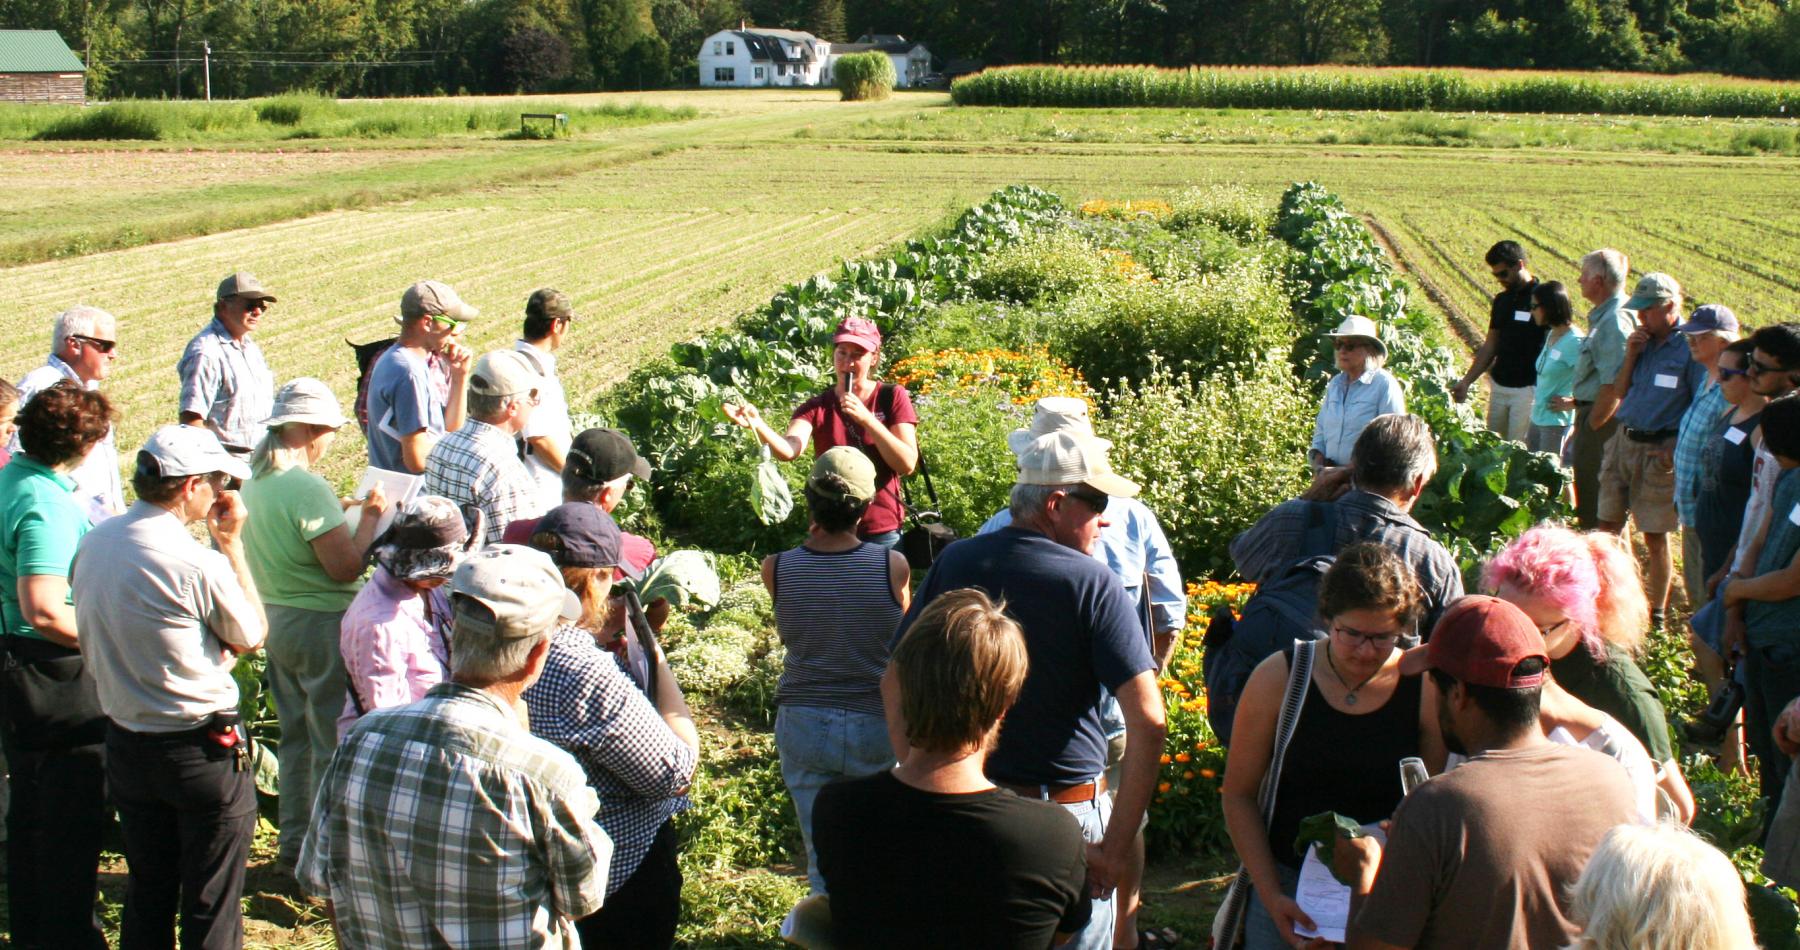 Sue Scheufele, leader of the production agriculture areas in the Extension Agriculture Program, presents to growers at the UMass Crop and Animal Research and Education Farm in South Deerfield.